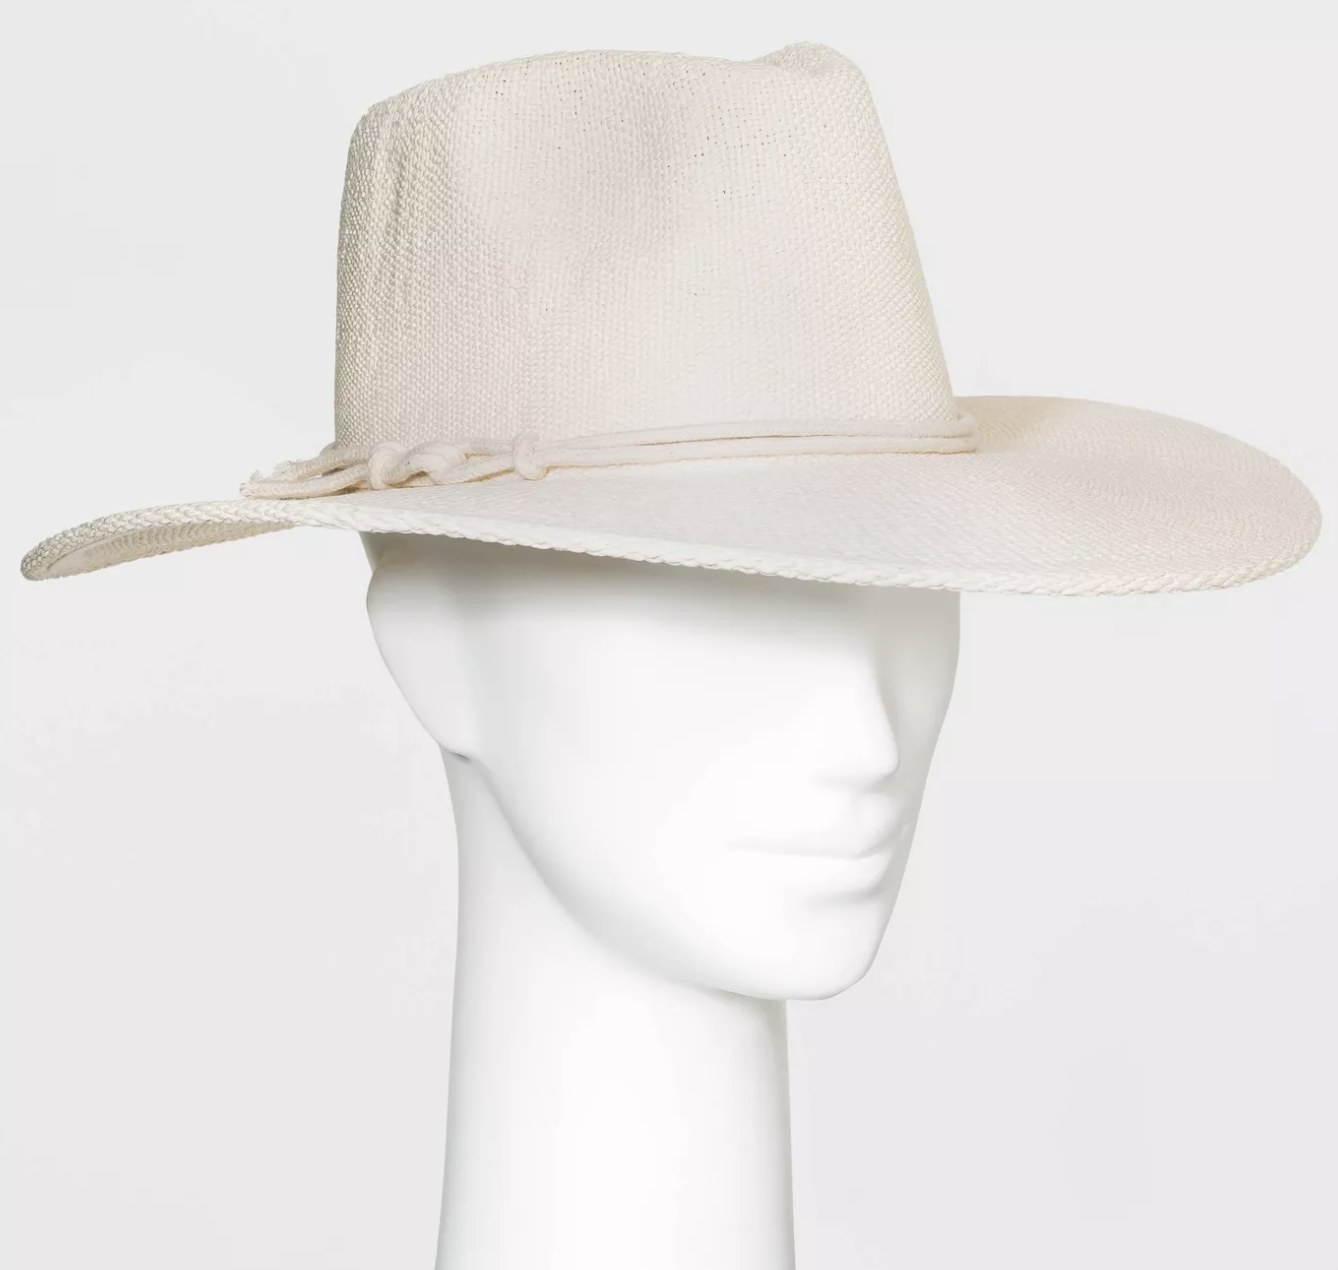 A mannequin wears the off-white hat on its head